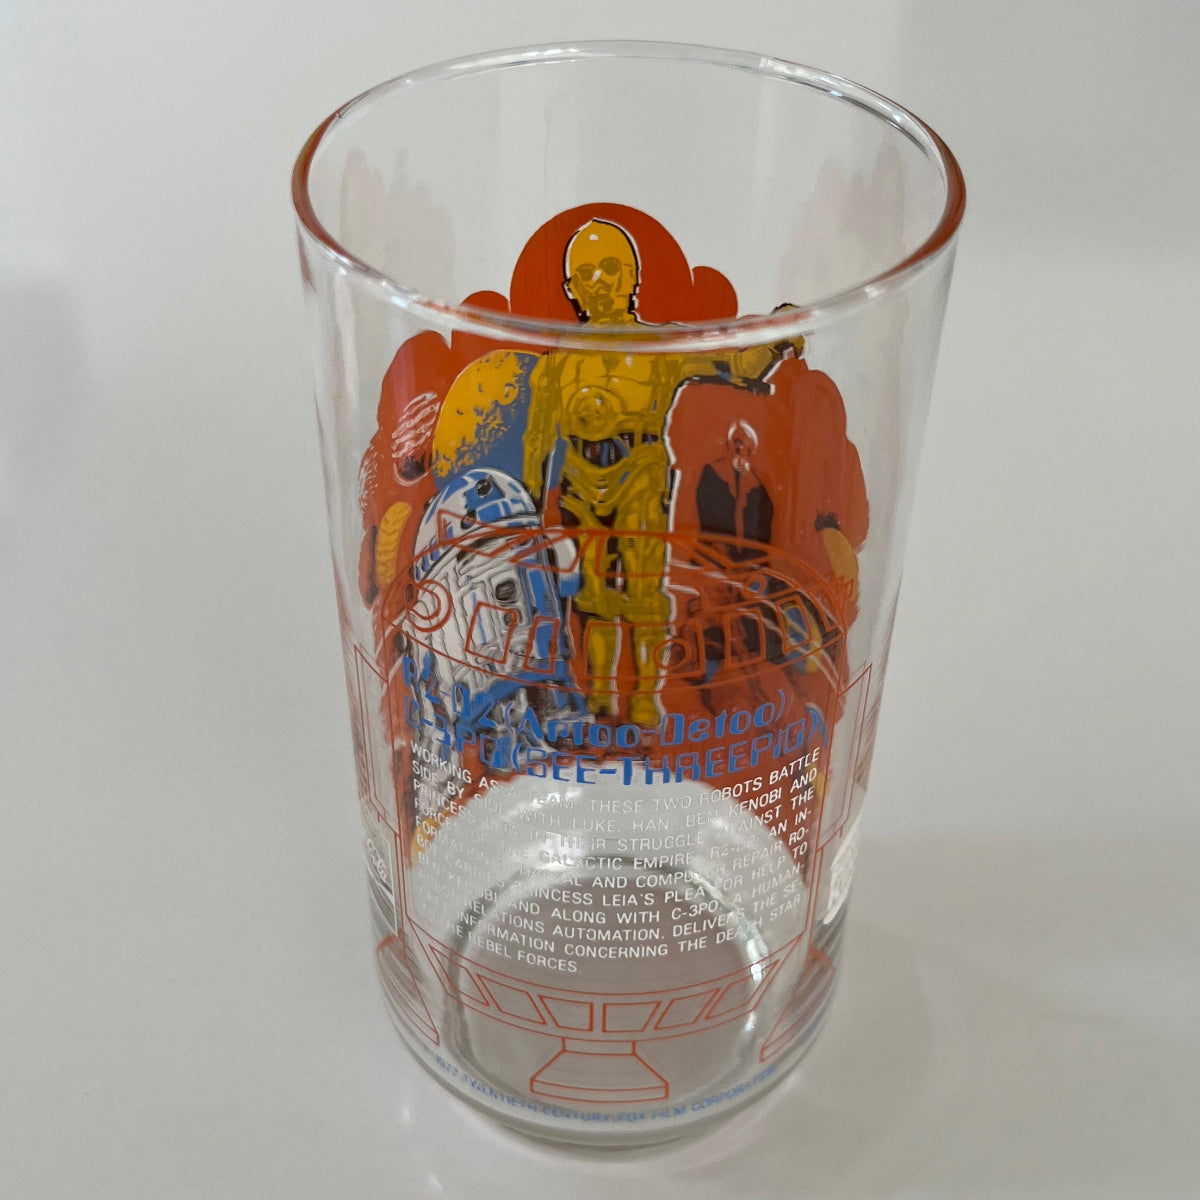 Vintage 1977 Burger King Star Wars R2-D2 C-3P0 Collectible Drinking Glass